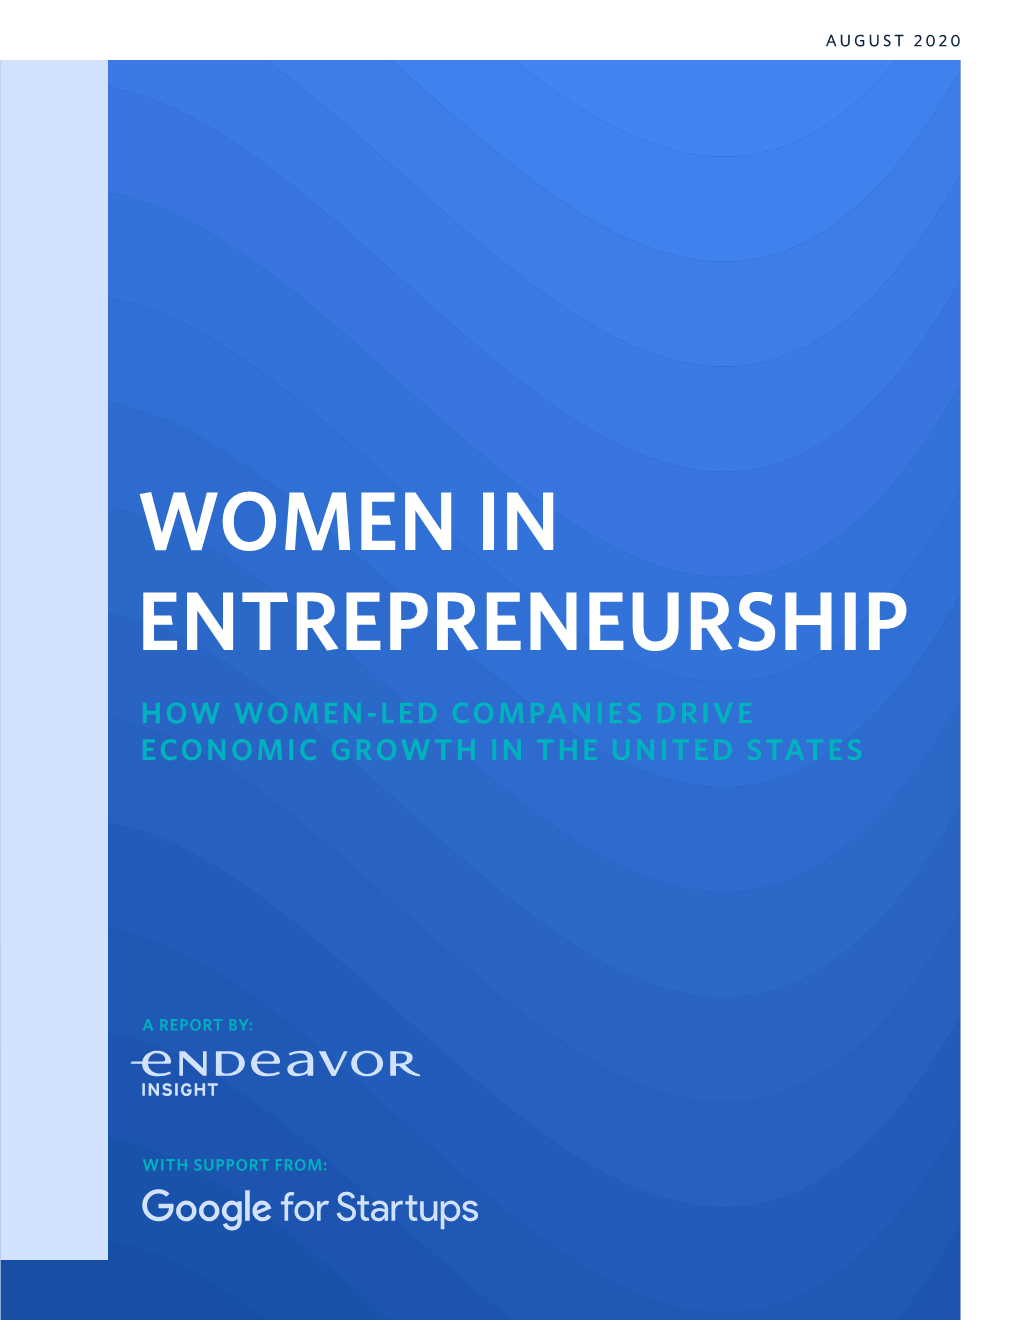 Women in Entrepreneurship How Women-Led Companies Drive Economic Growth in the United States